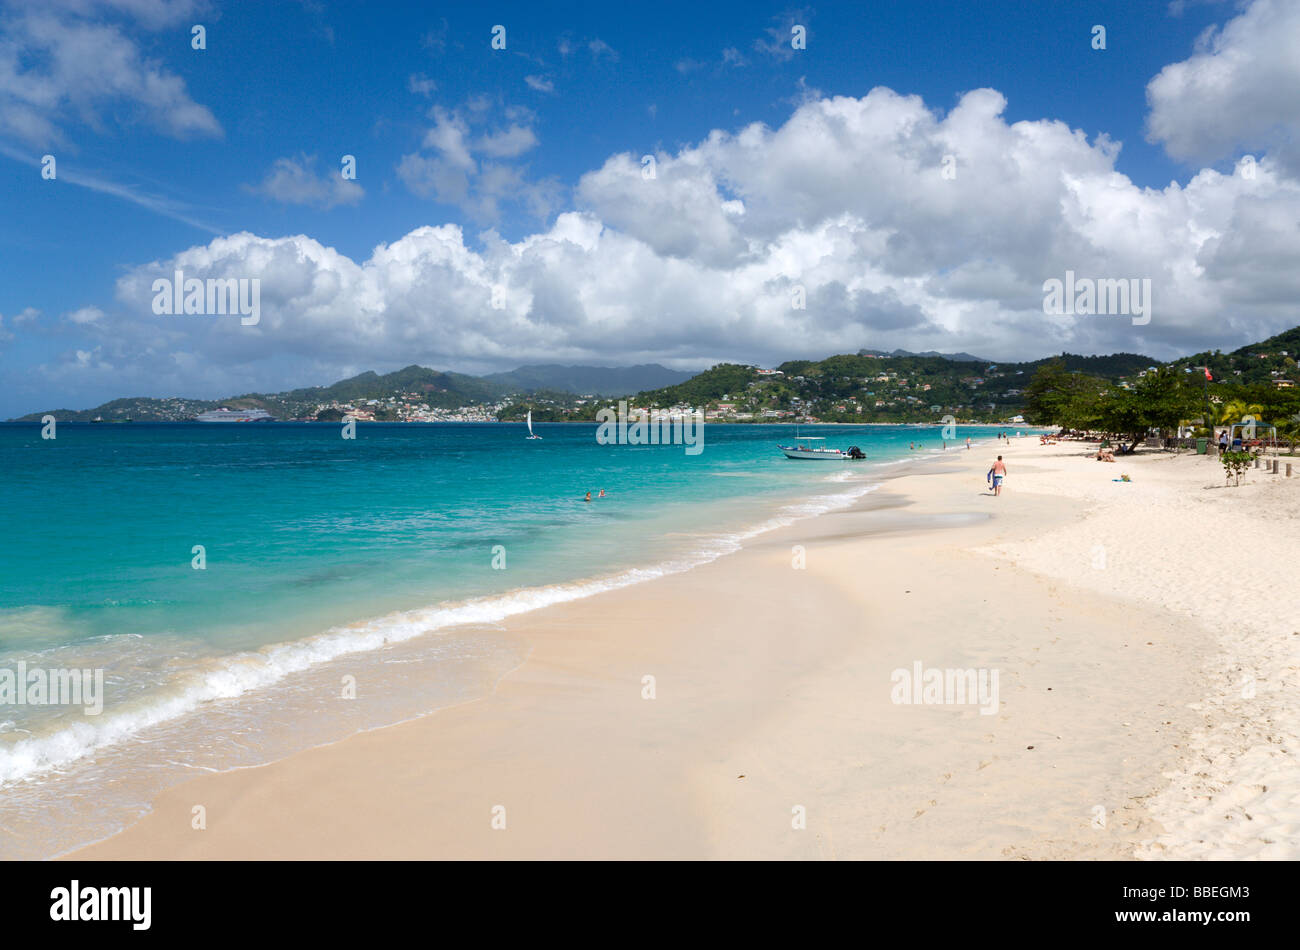 WEST INDIES Grenada Caribbean St George Grand Anse Beach Waves of aquamarine sea breaking on two mile stretch. People on beach Stock Photo